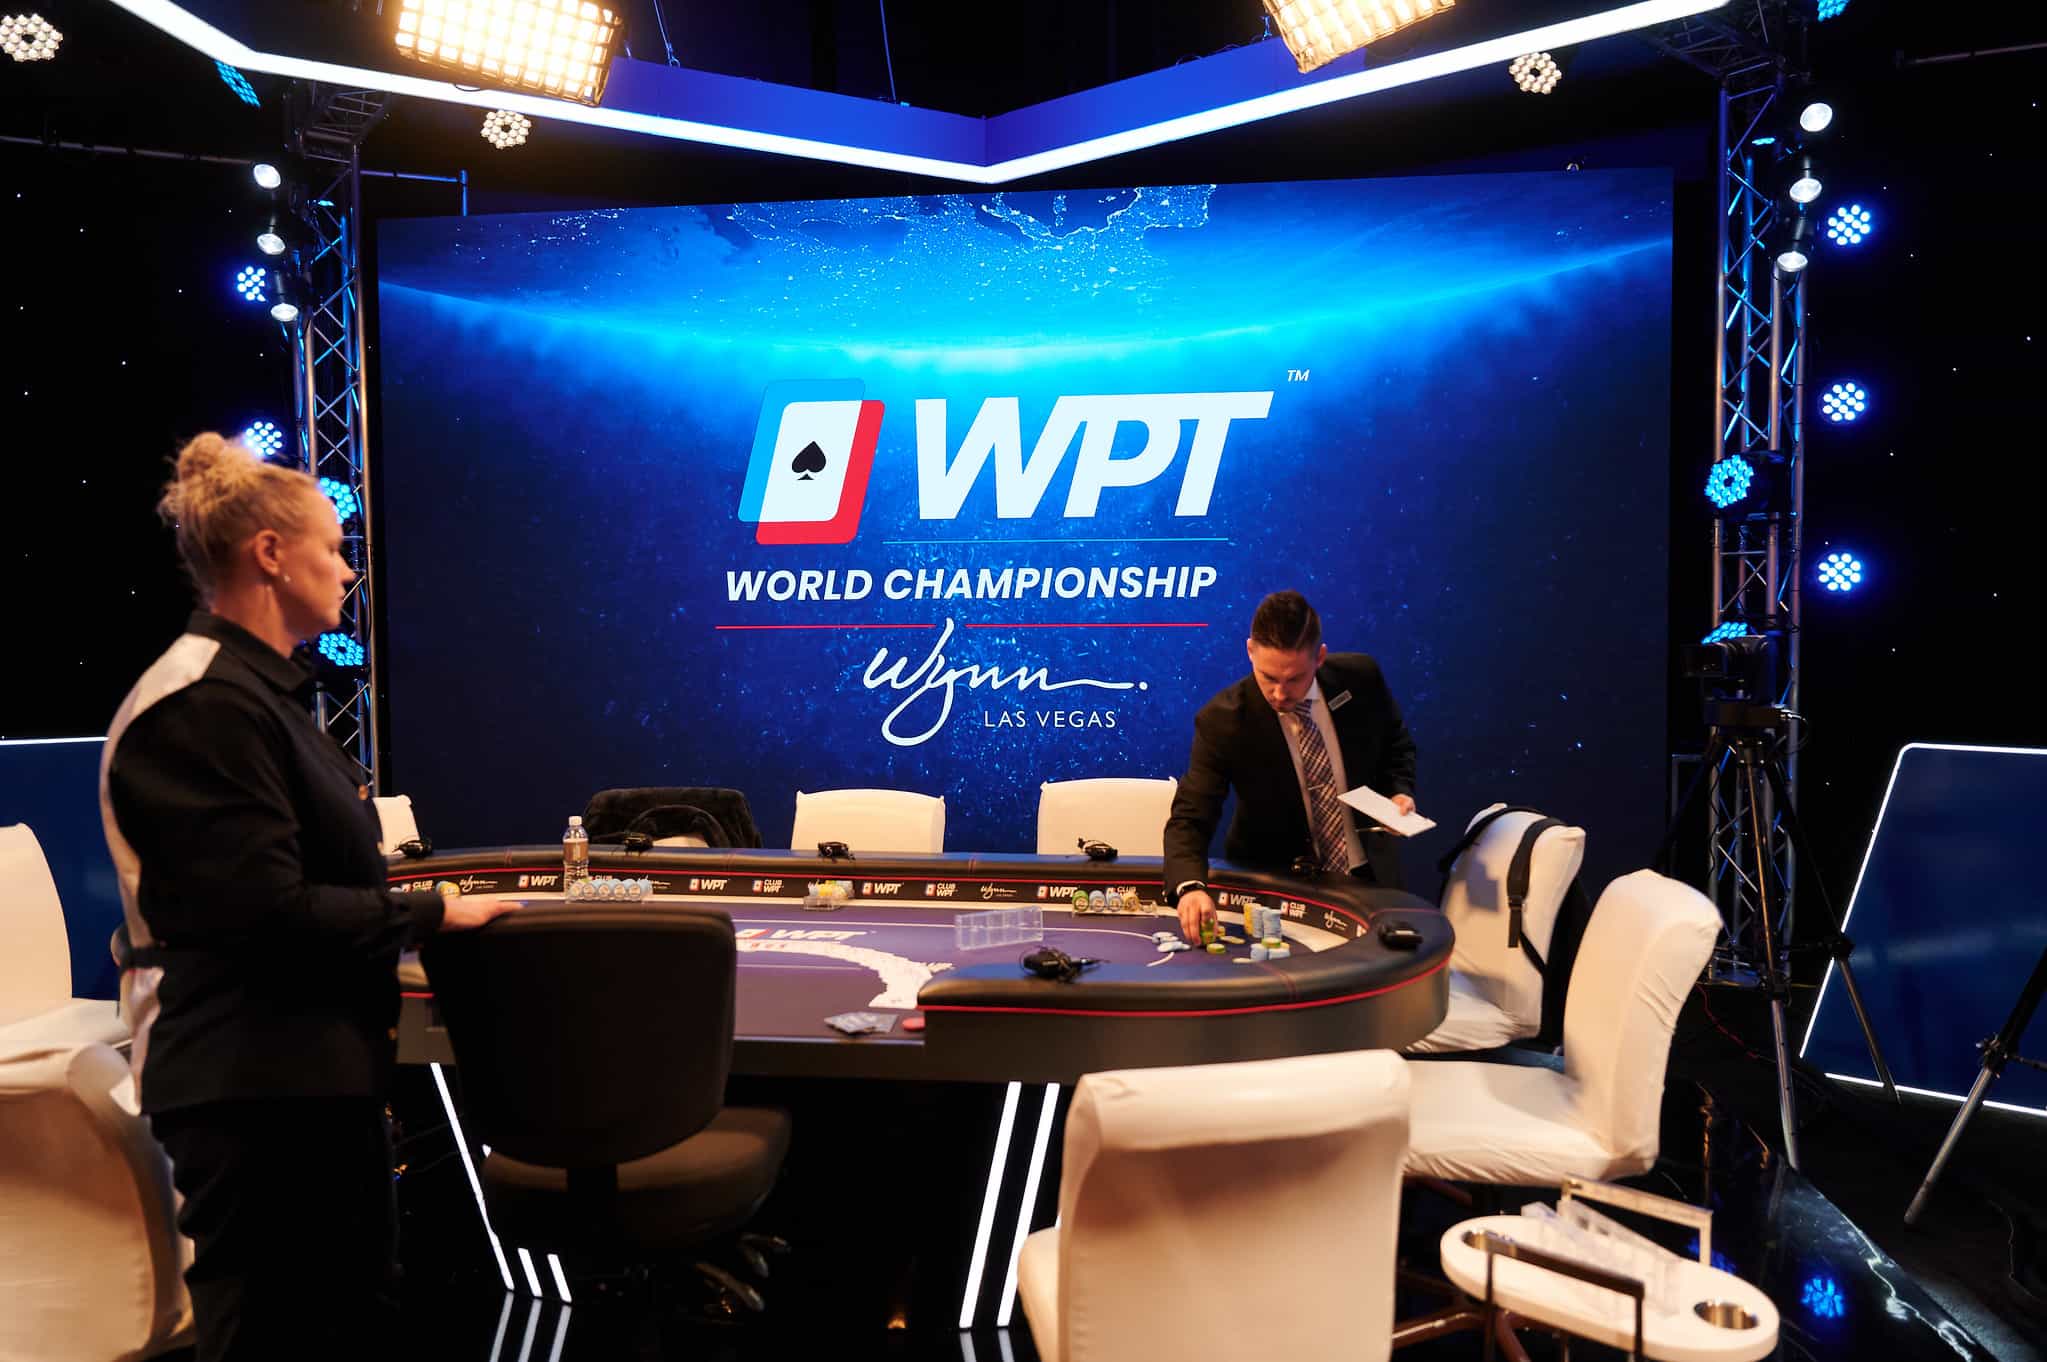 The final table of the 2022 WPT World Championship is being prepared for play. 